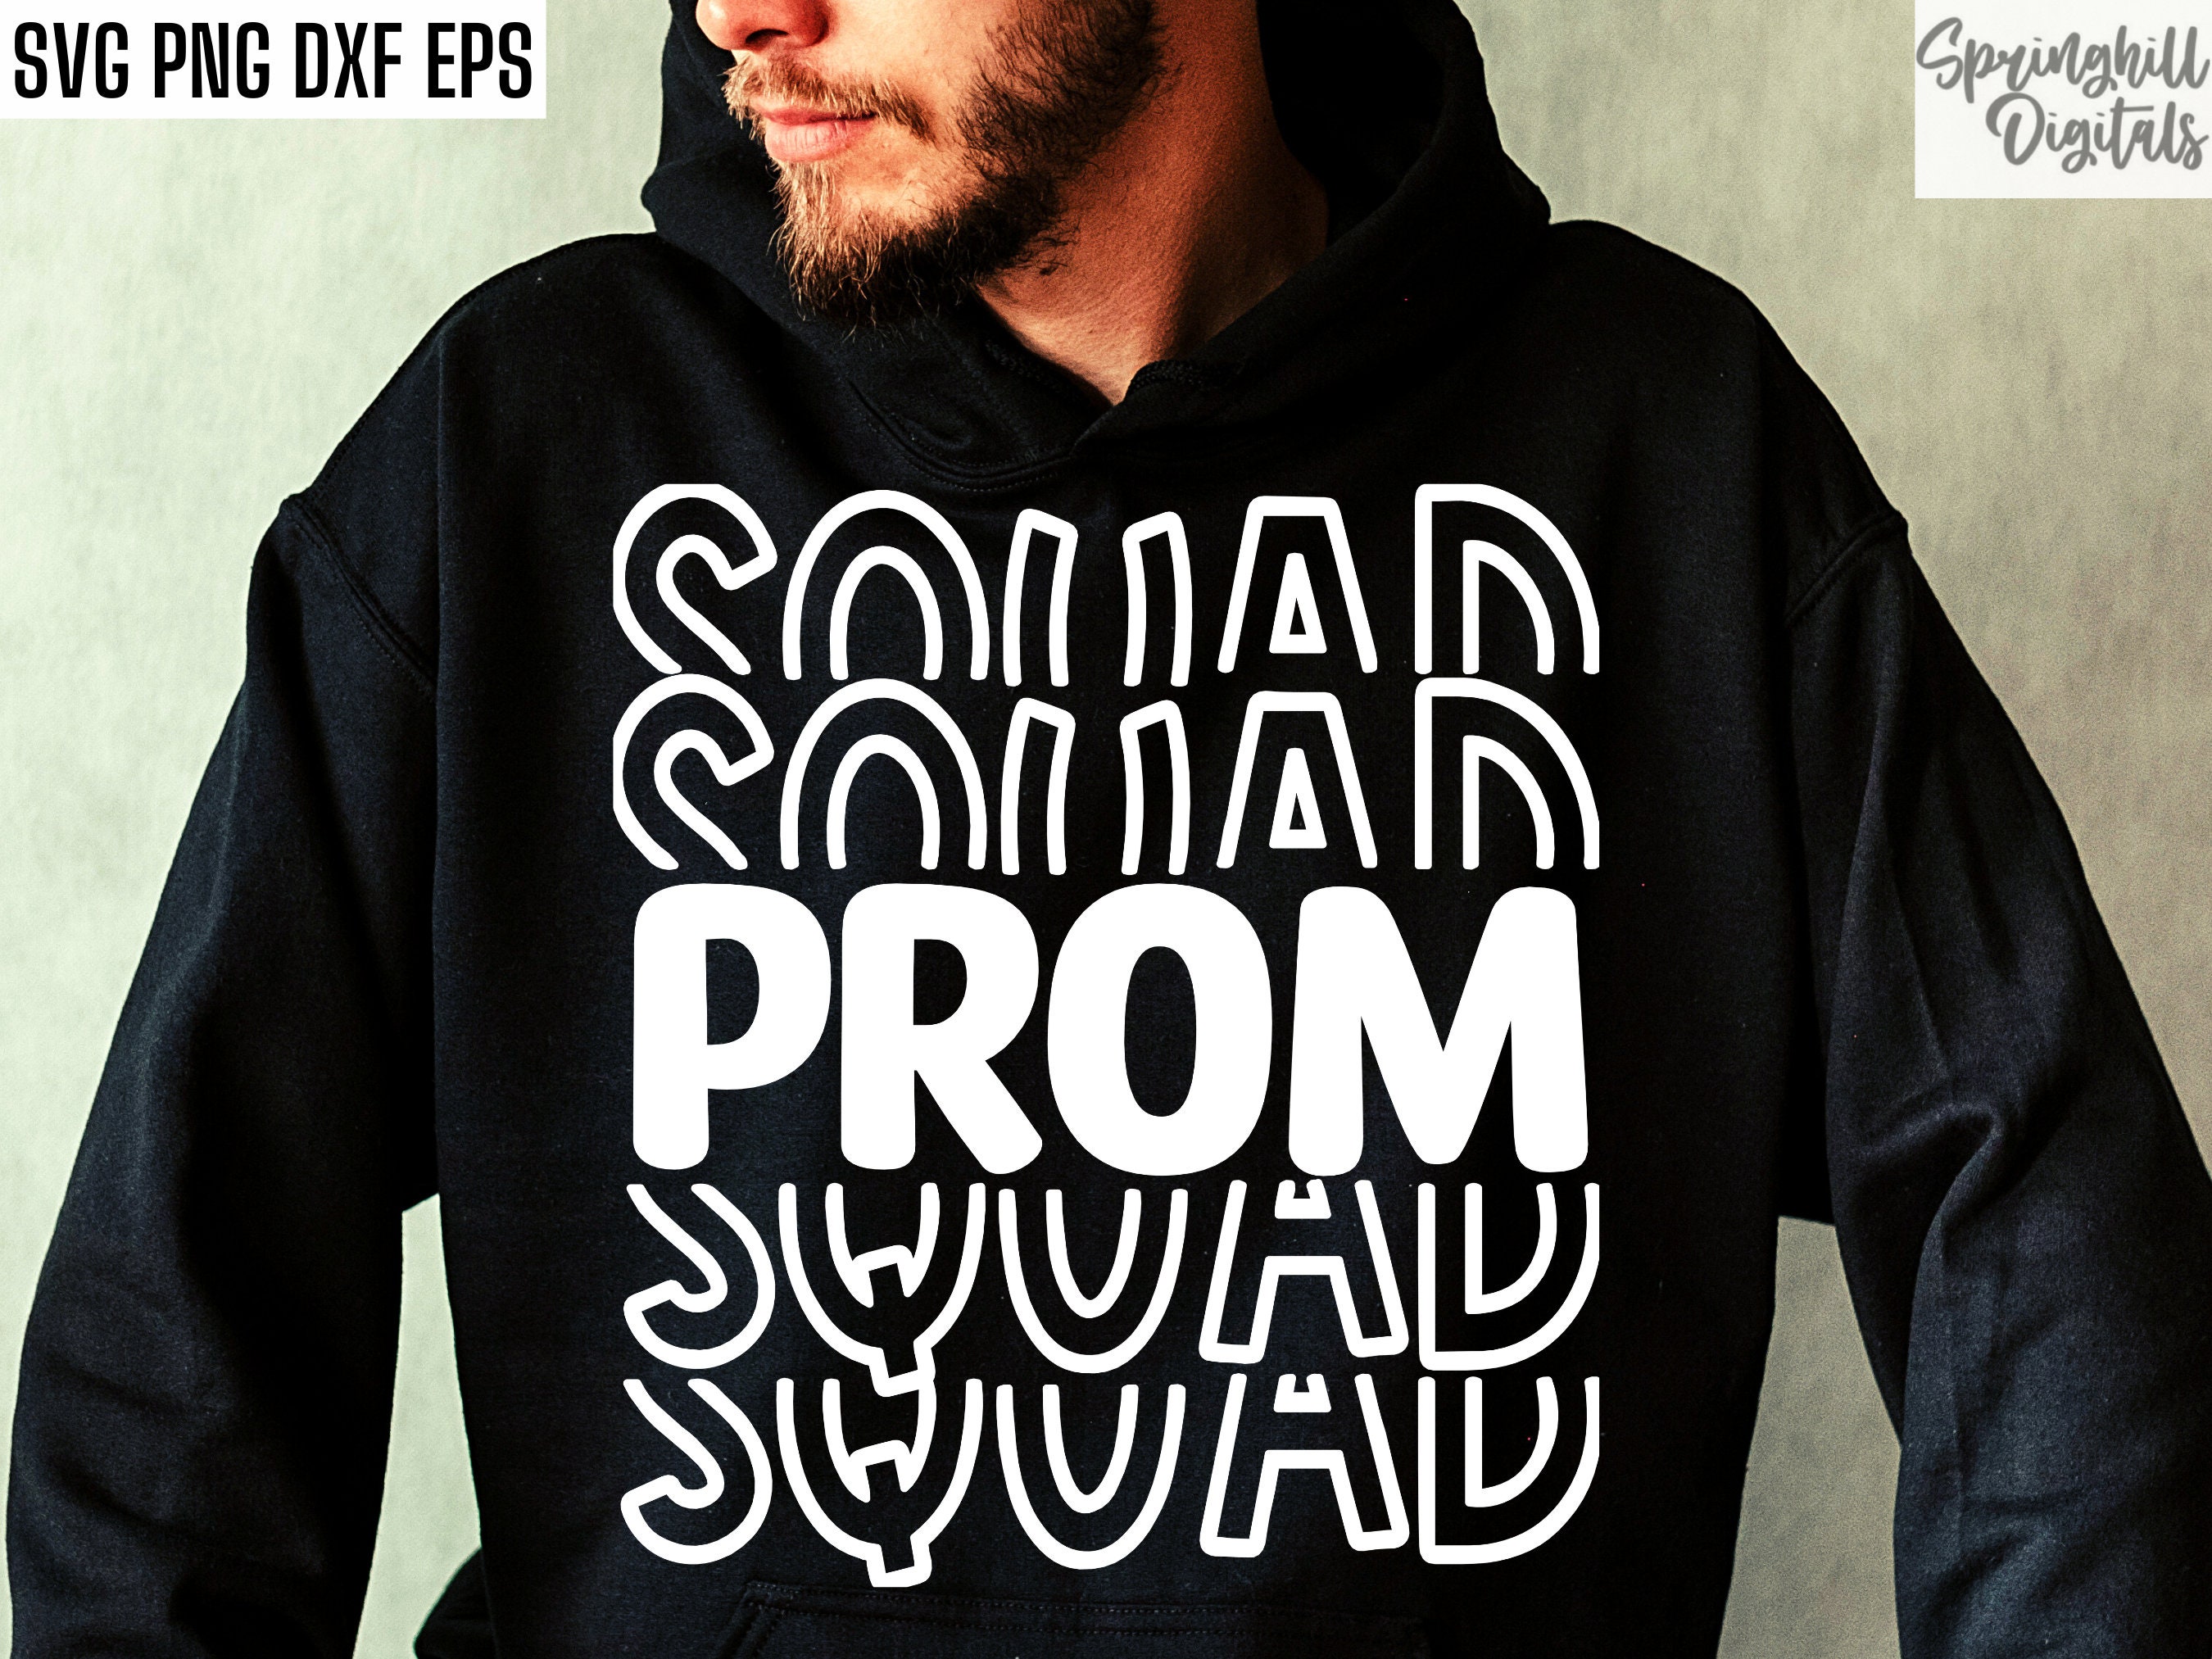 Discover Prom Squad | Senior Prom Svg | Prom Tshirt Designs | Prom Shirt Pngs | High School Prom | Formal Dance Svgs | Prom Date | End of School Year